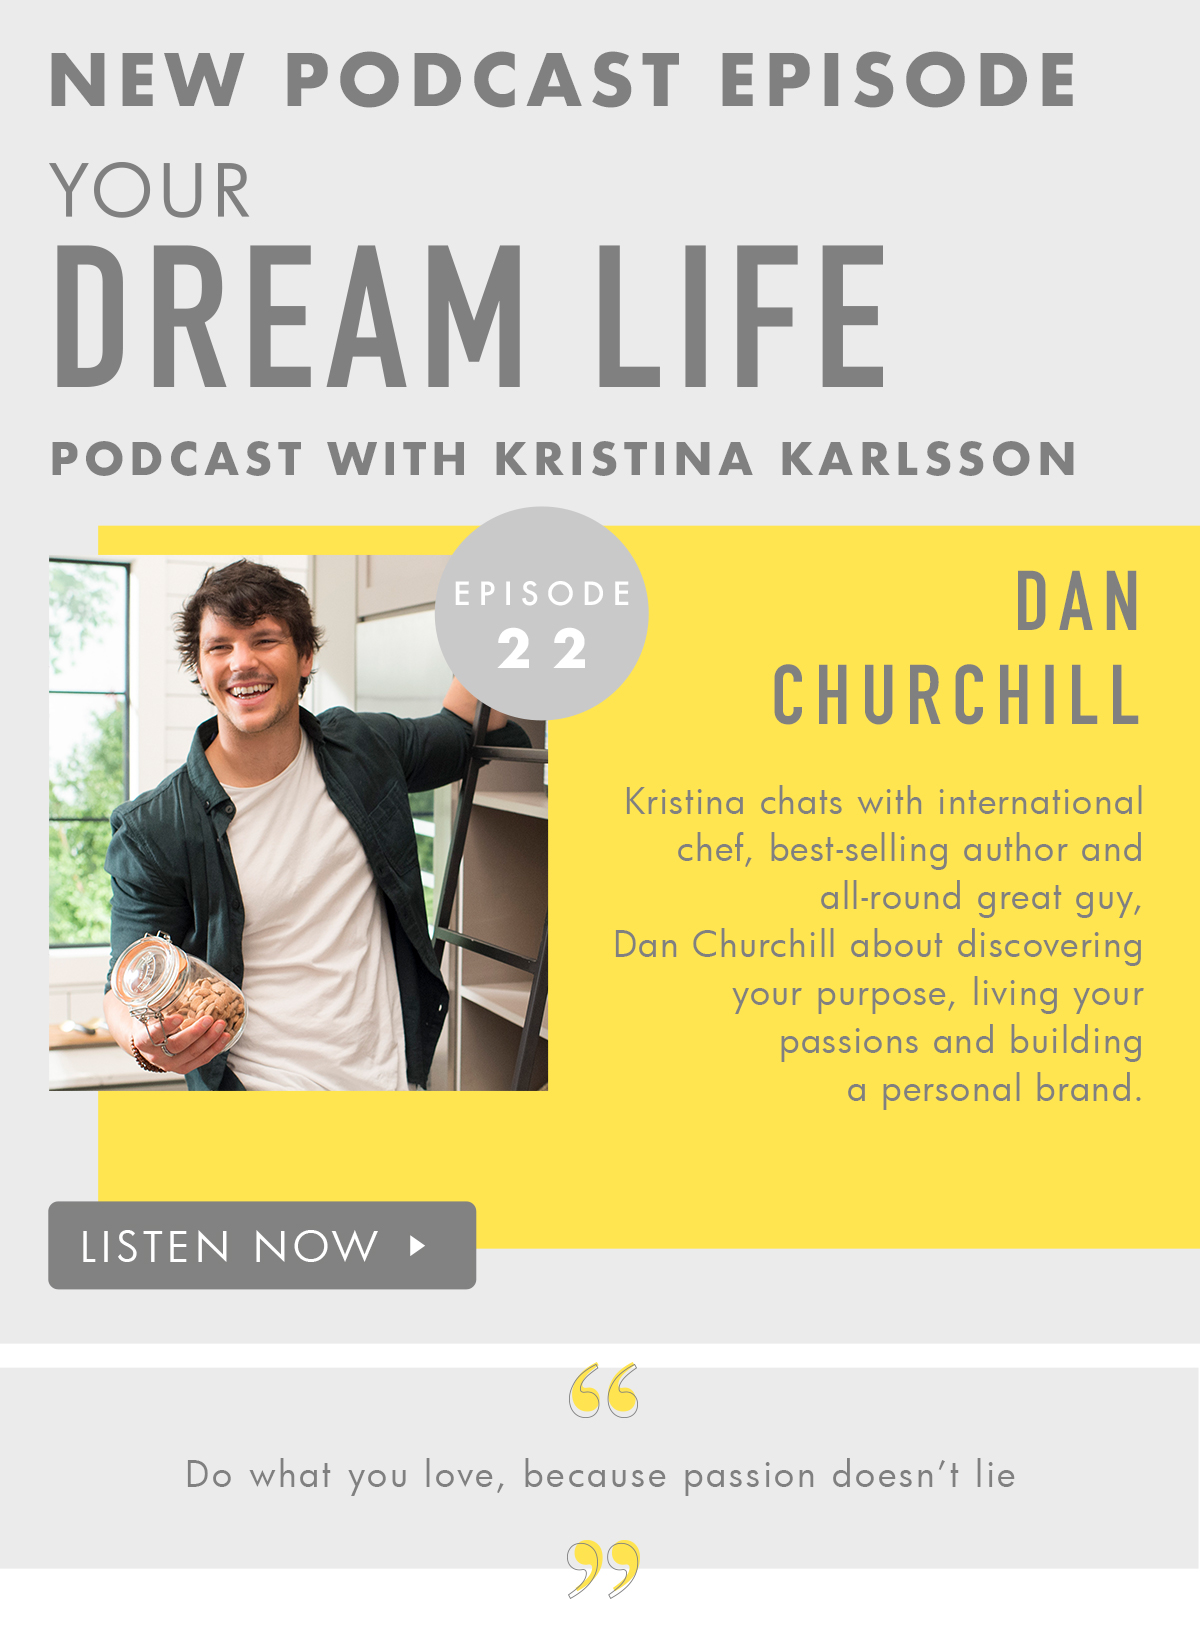 New Podcast Episode. Your Dream Life with Kristina Karlsson. Listen now. 